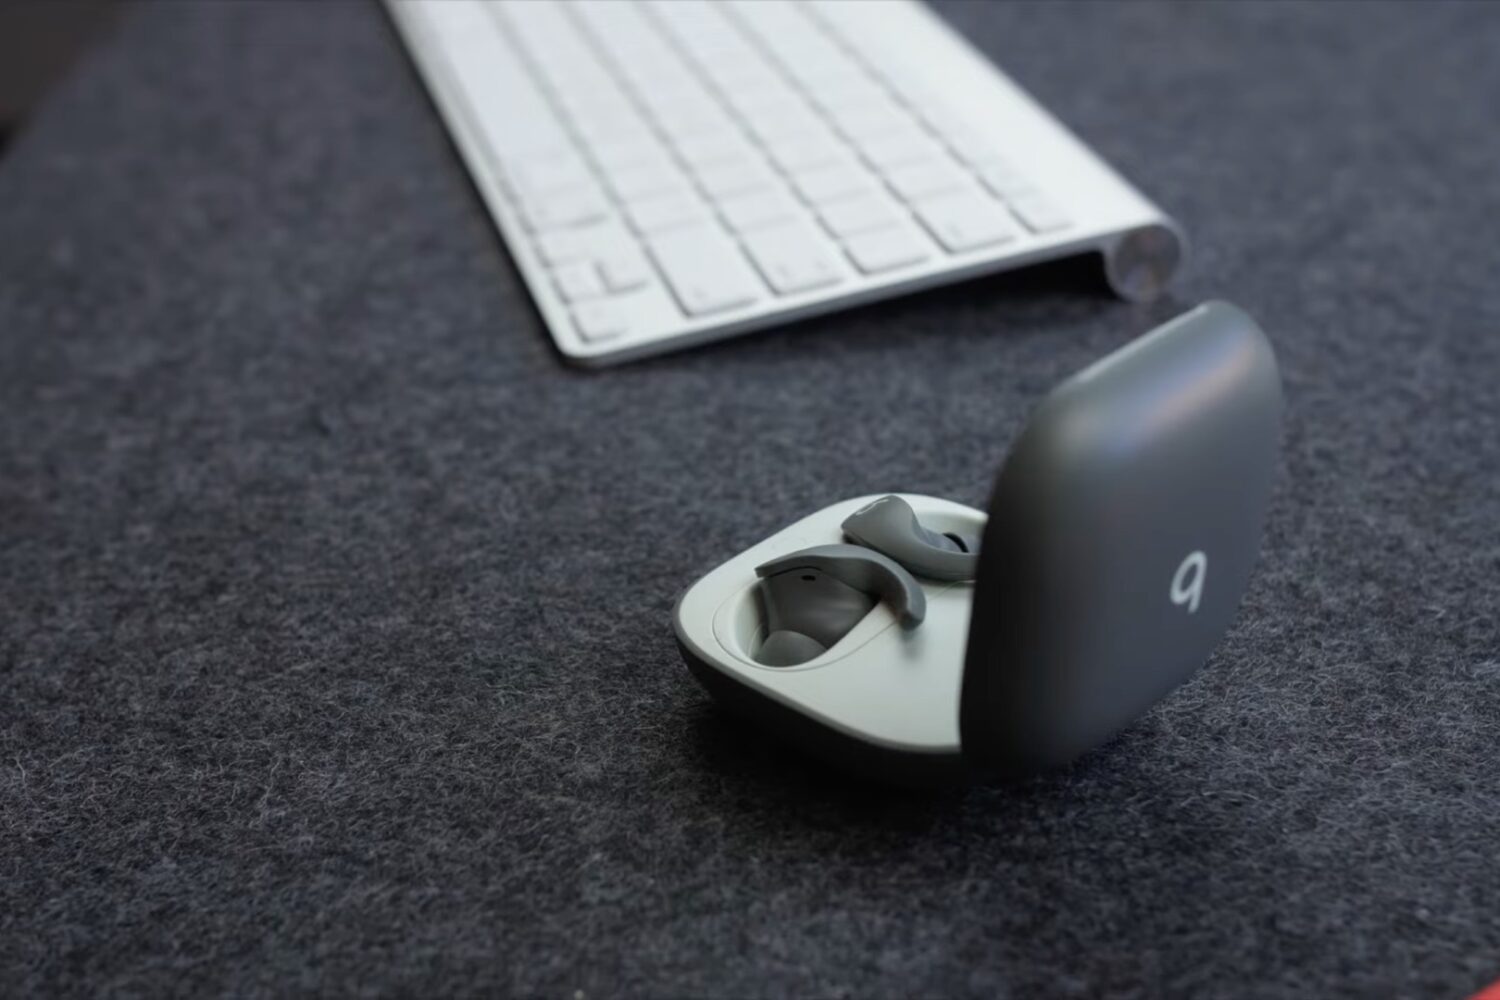 A Beast Fit Pro charging case with both earbuds shown with the lid open, laid flat on a gray work desk next to a white Apple wireless keyboard